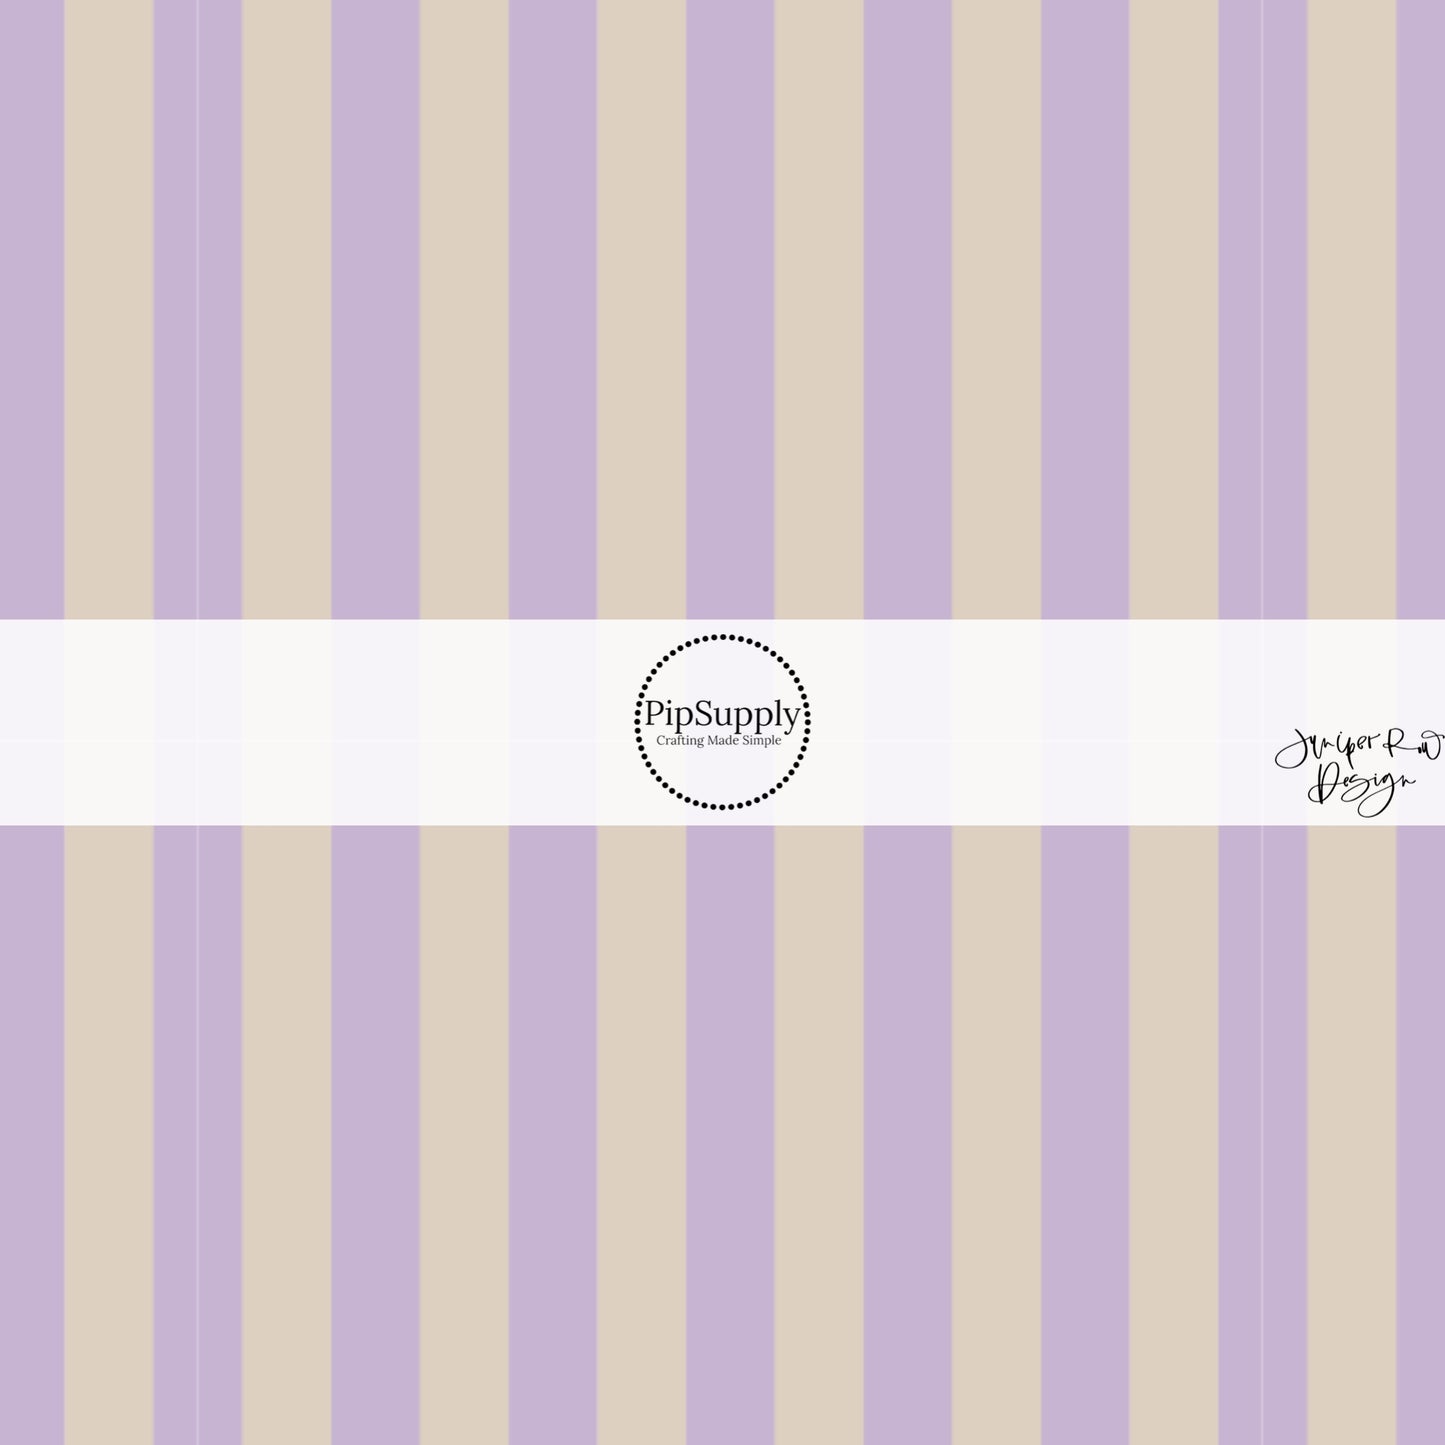 Purple and Beige Striped Fabric by the Yard.